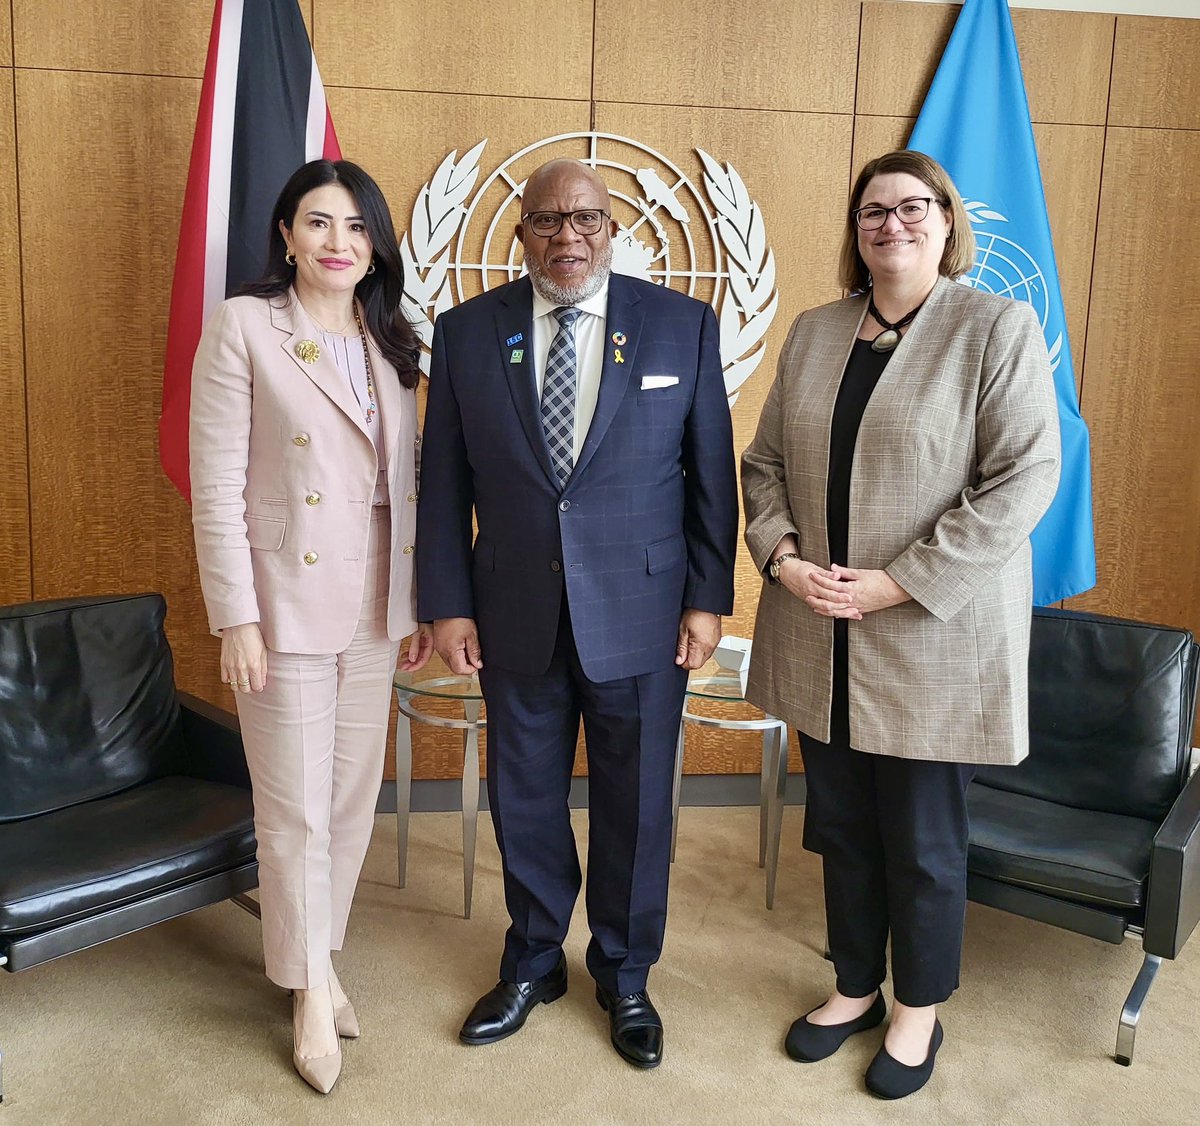 Appreciated discussion with H.E Maritza Chan-Valverde @MaritzaChanV PR of Costa Rica & H.E. Carolyn Schwalger @CSchwalgerNZ PR of New Zealand on addressing sea level rise. Thanked them for their work on co-facilitating the crucial process leading to September's high-level…